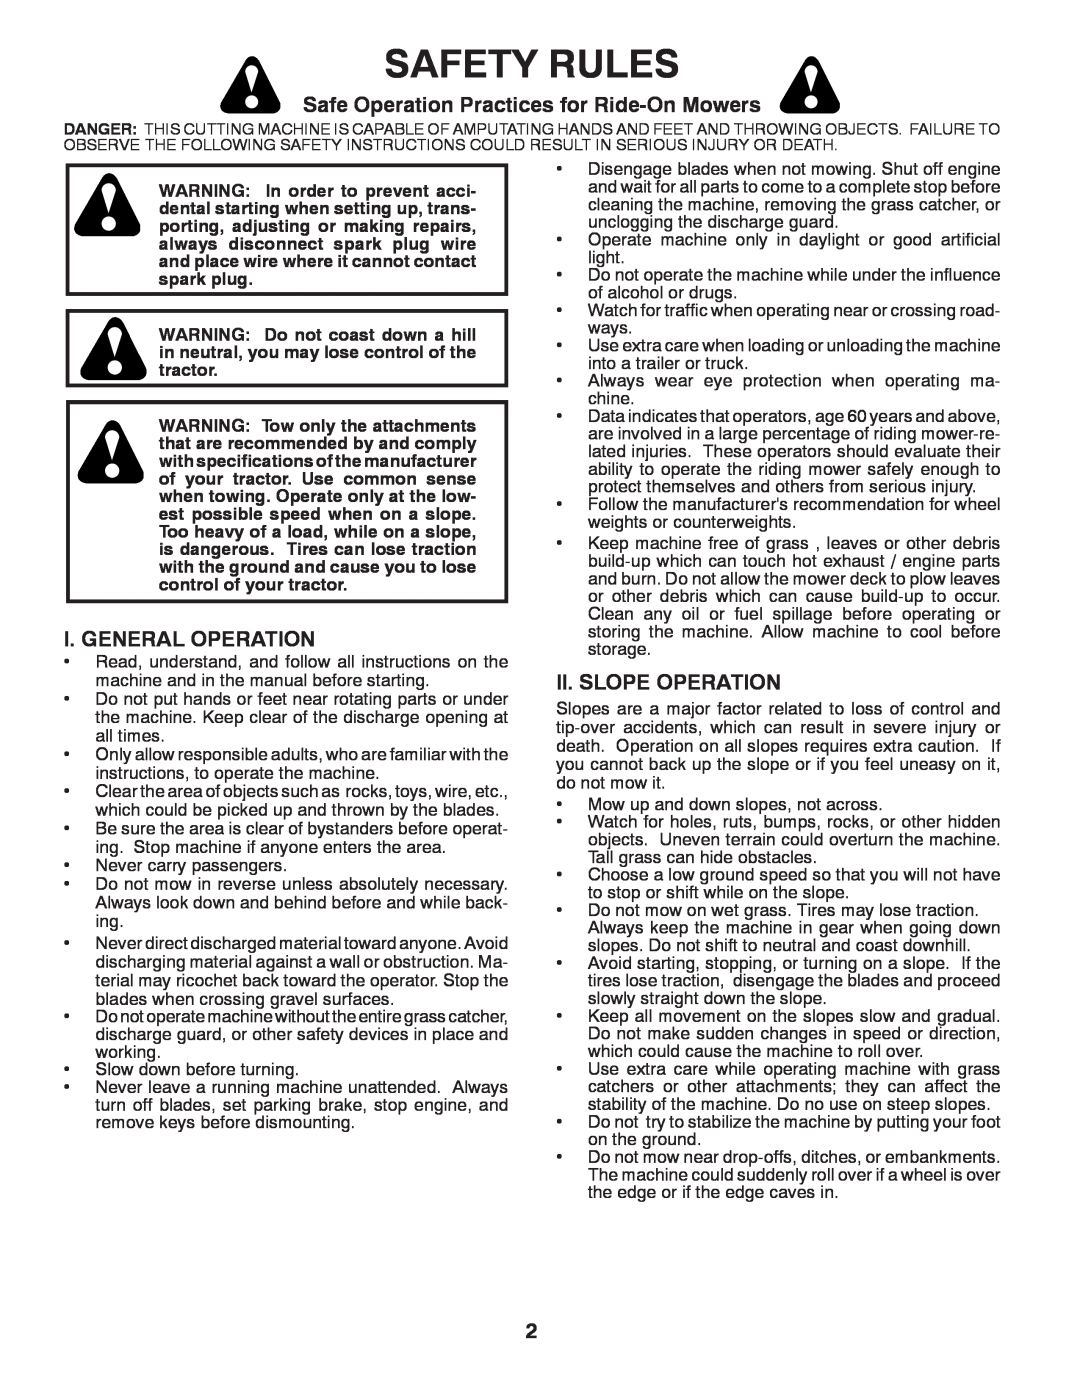 Murray 96017000700 Safety Rules, Safe Operation Practices for Ride-On Mowers, I. General Operation, Ii. Slope Operation 